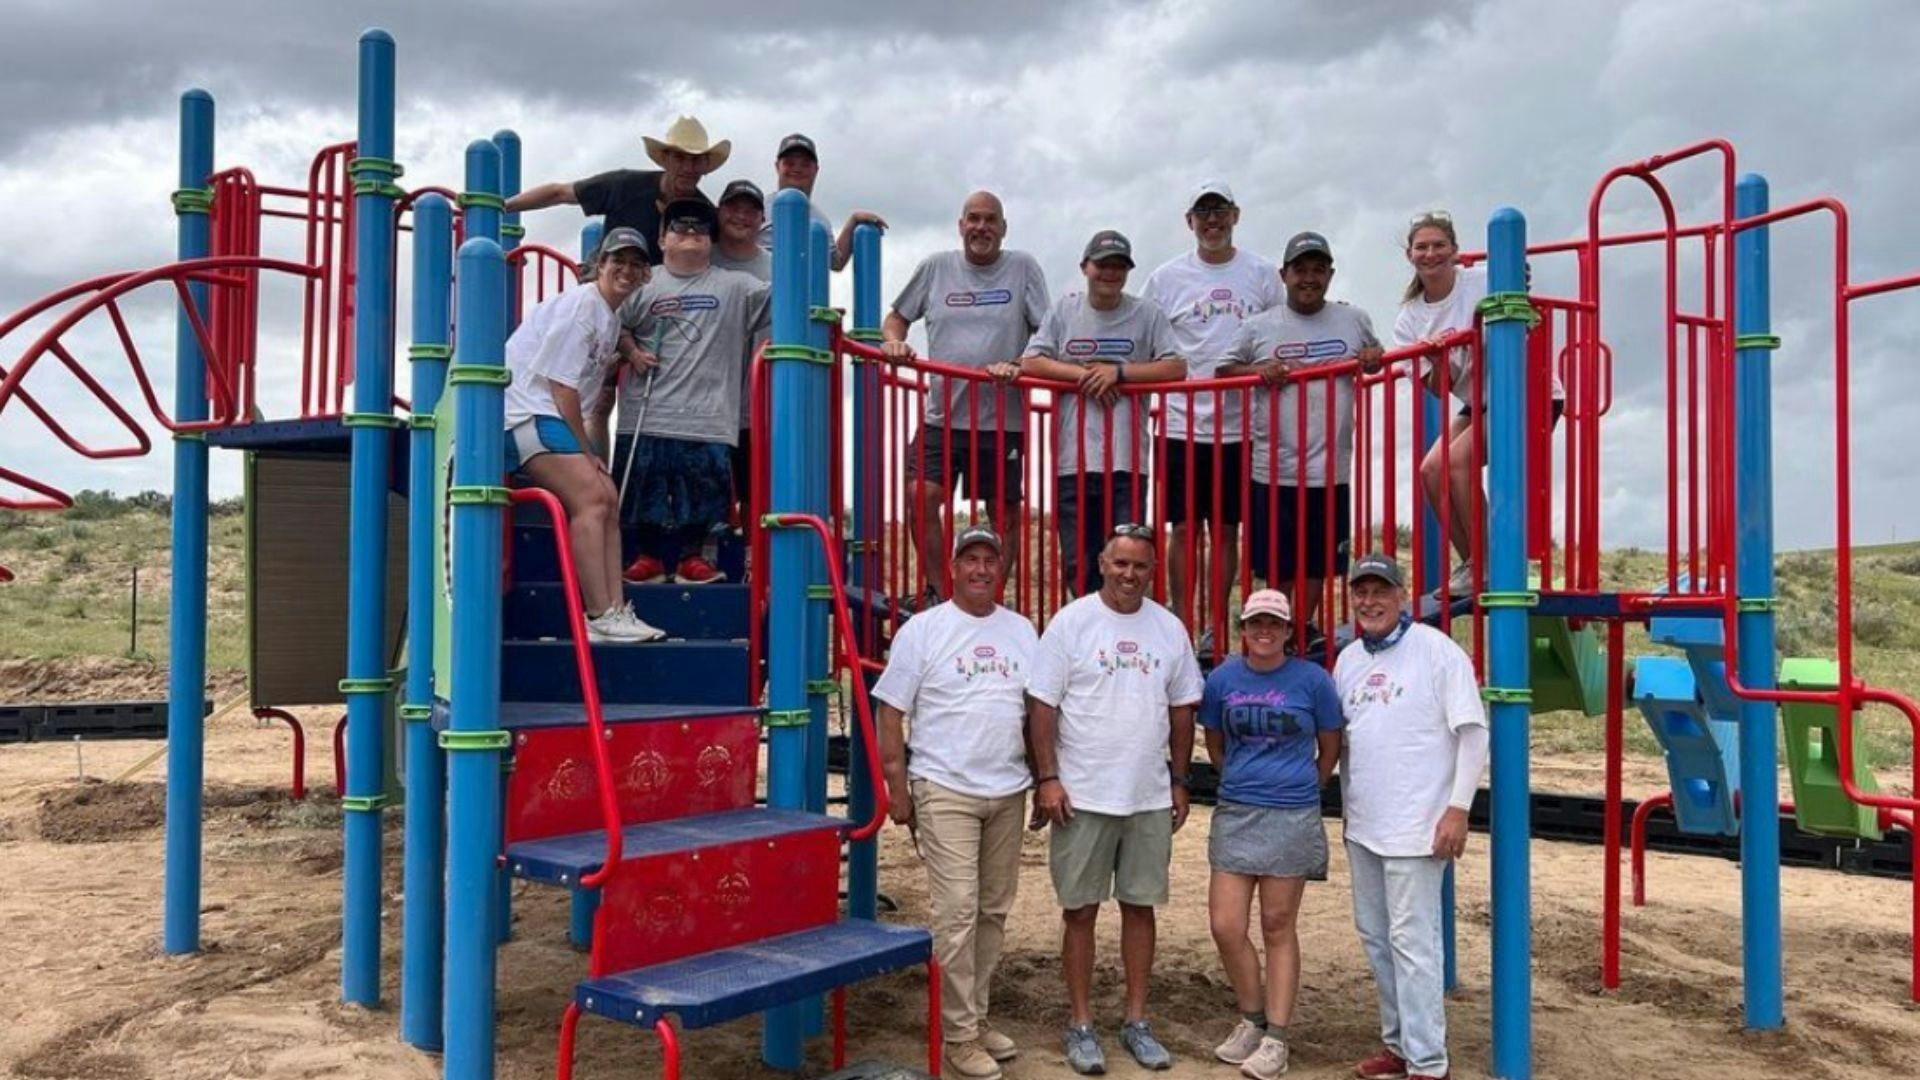 Unlimited Play built this fully accessible playground for the Pinkerton family of Glenrock, Wyoming.